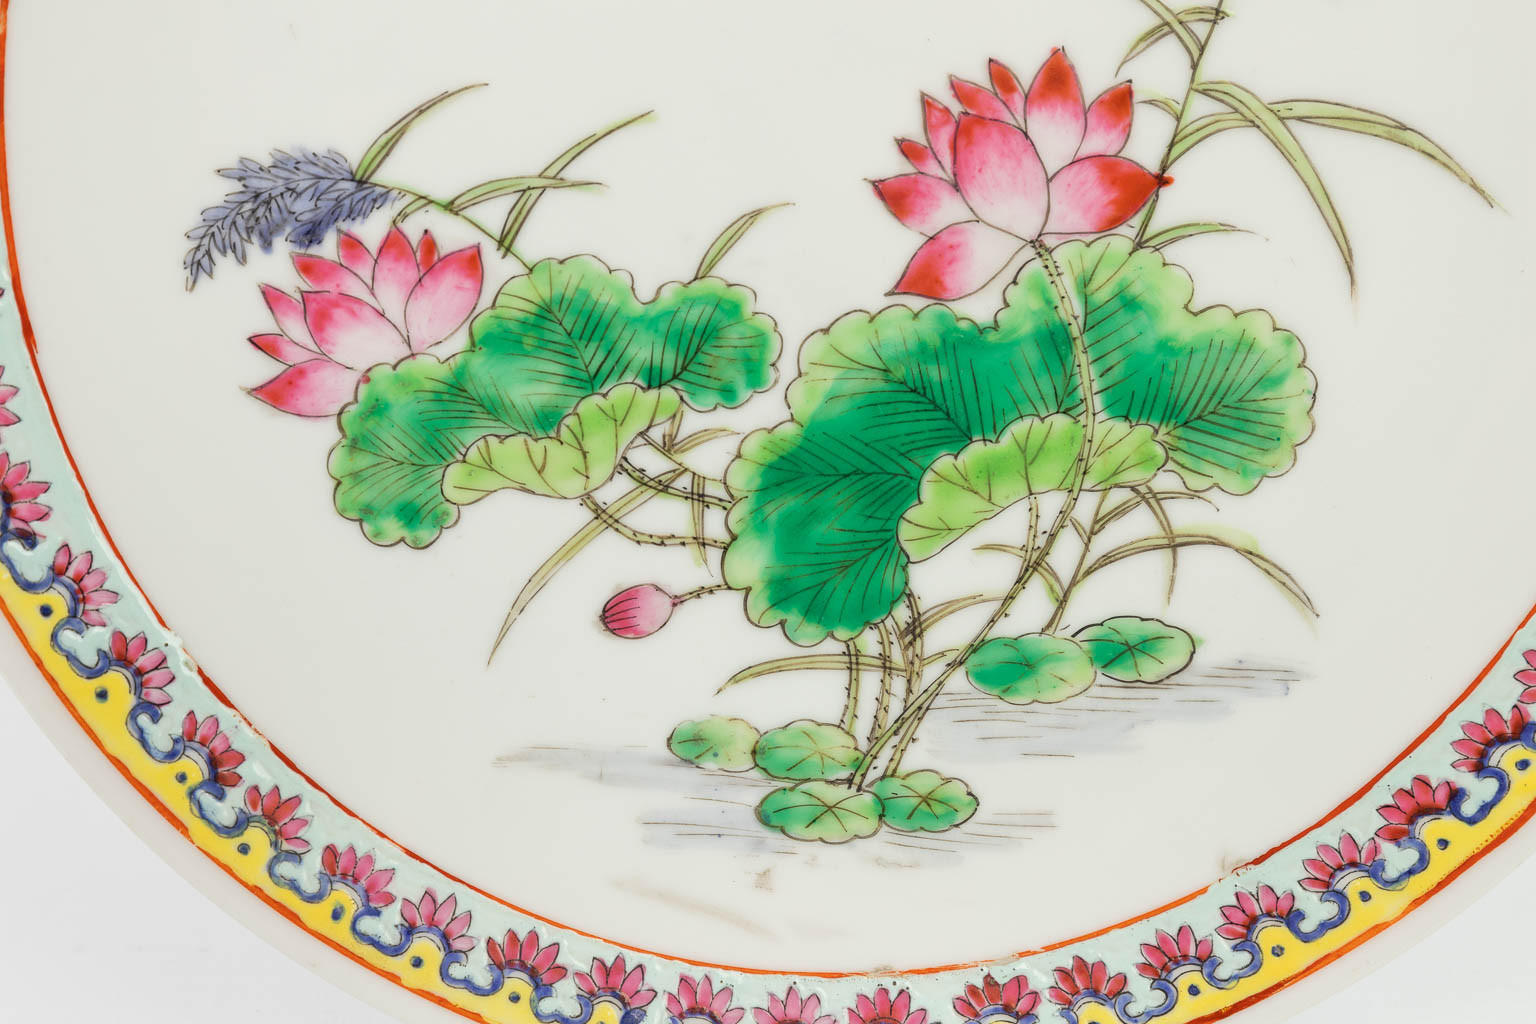 A pair of Chinese plates made of porcelain and decorated with fauna and flora. 20th century. Marked Qianlong. 